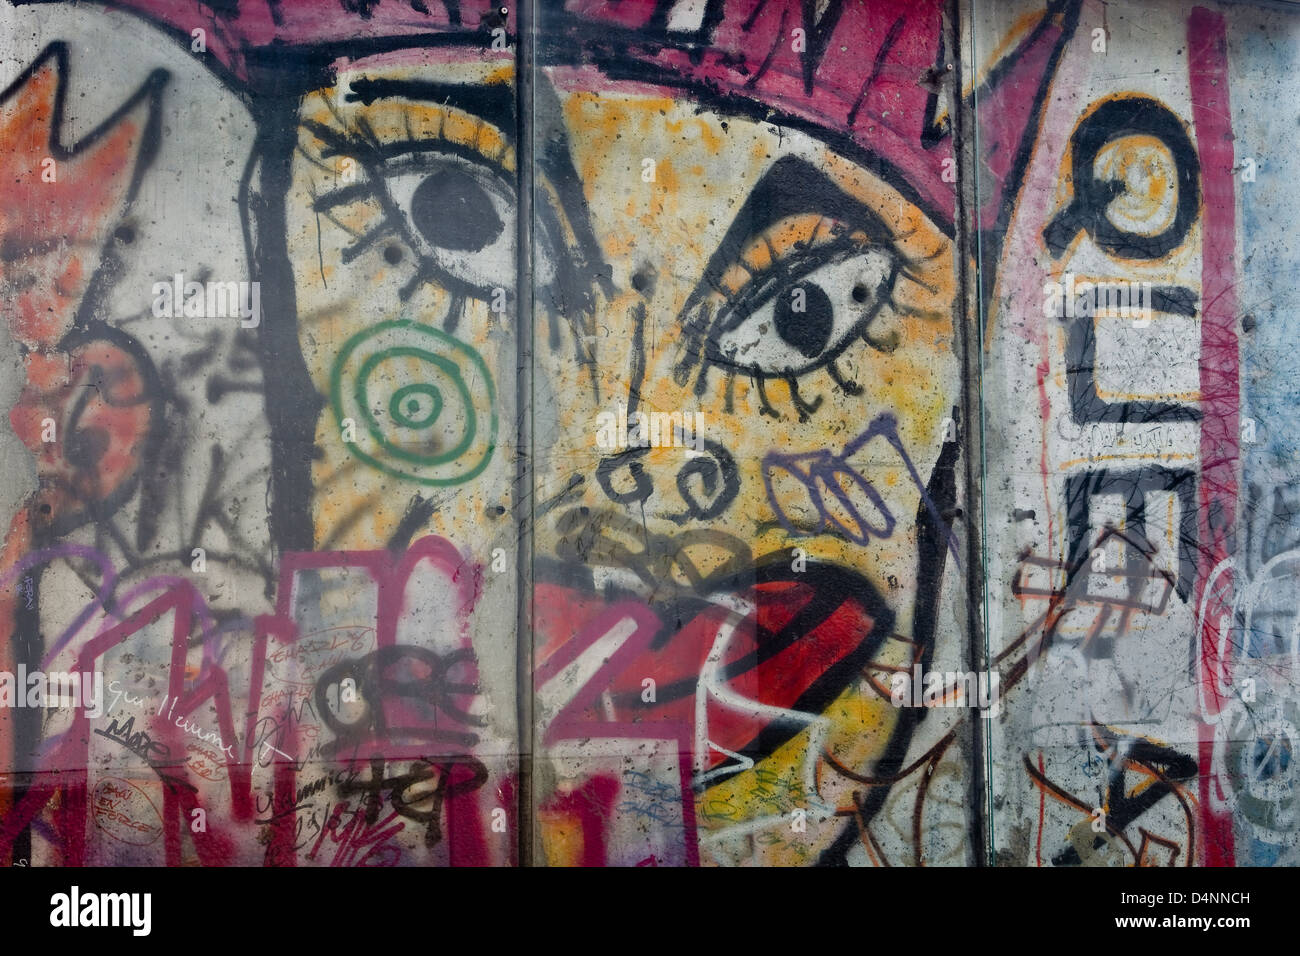 A piece of the Berlin wall in the La Defense area of Paris. It has been placed behind perspex to protect it. Stock Photo